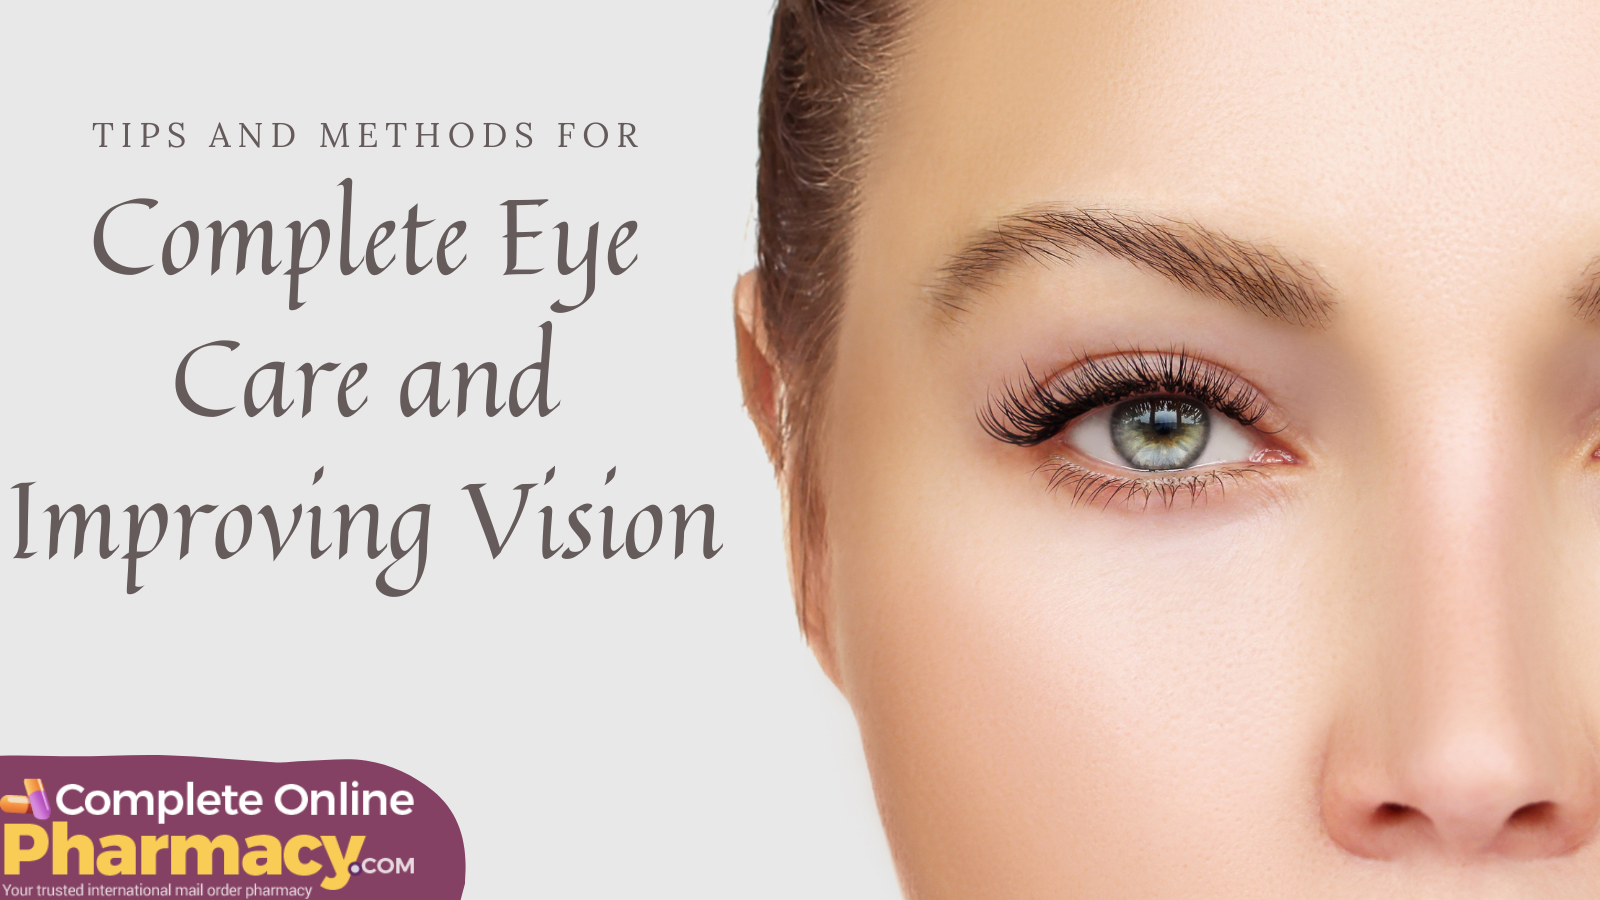 Tips and Methods For Complete Eye Care and Improving Vision